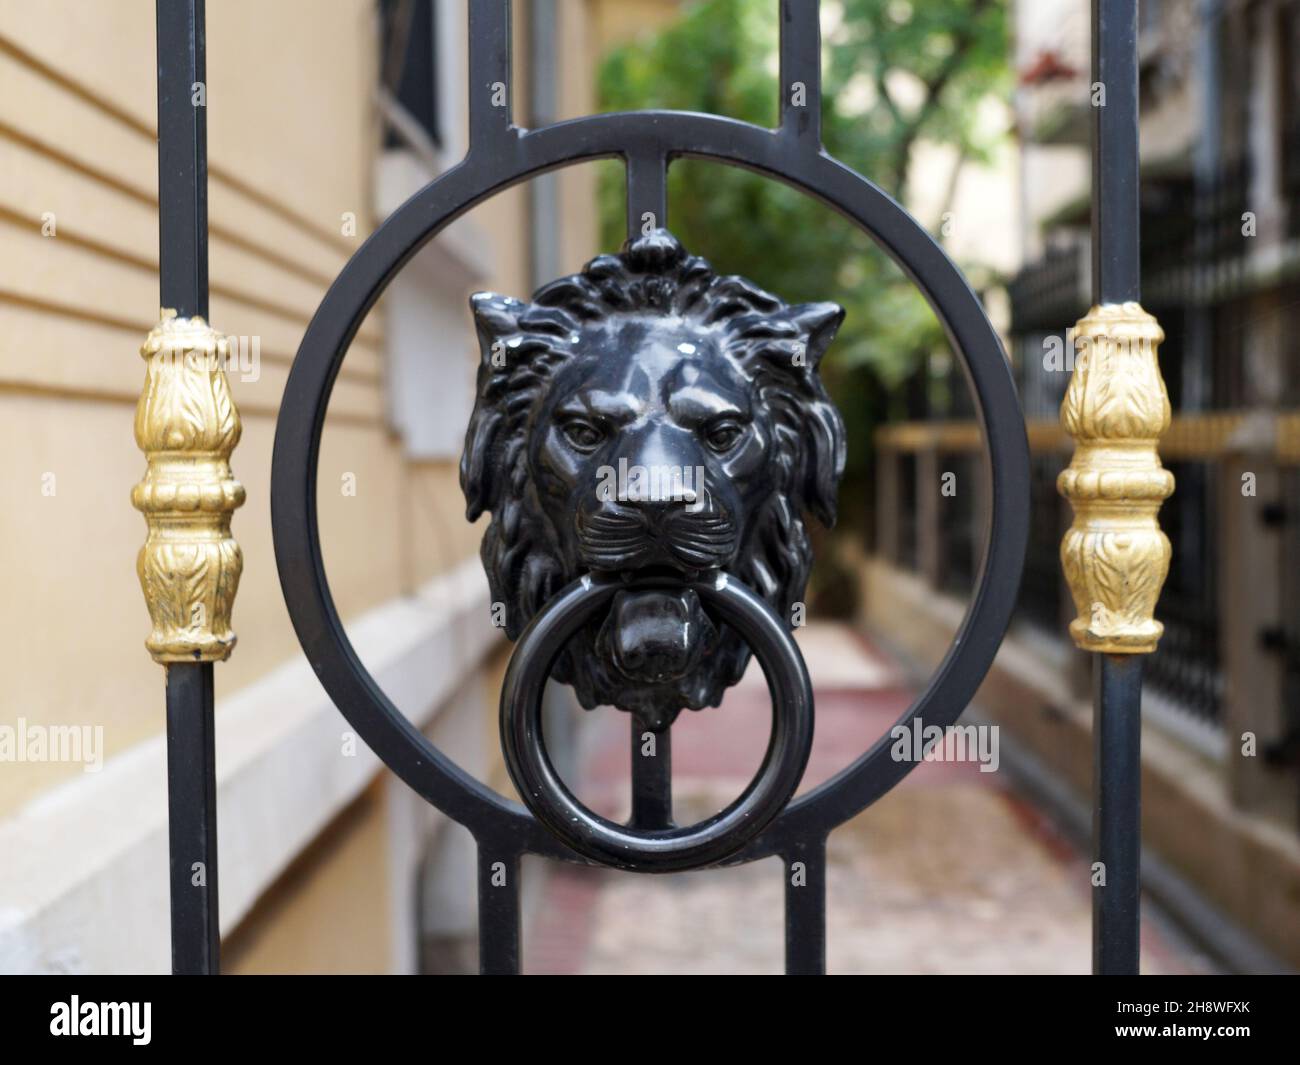 metal handle in the form of a lion's head with a ring on the